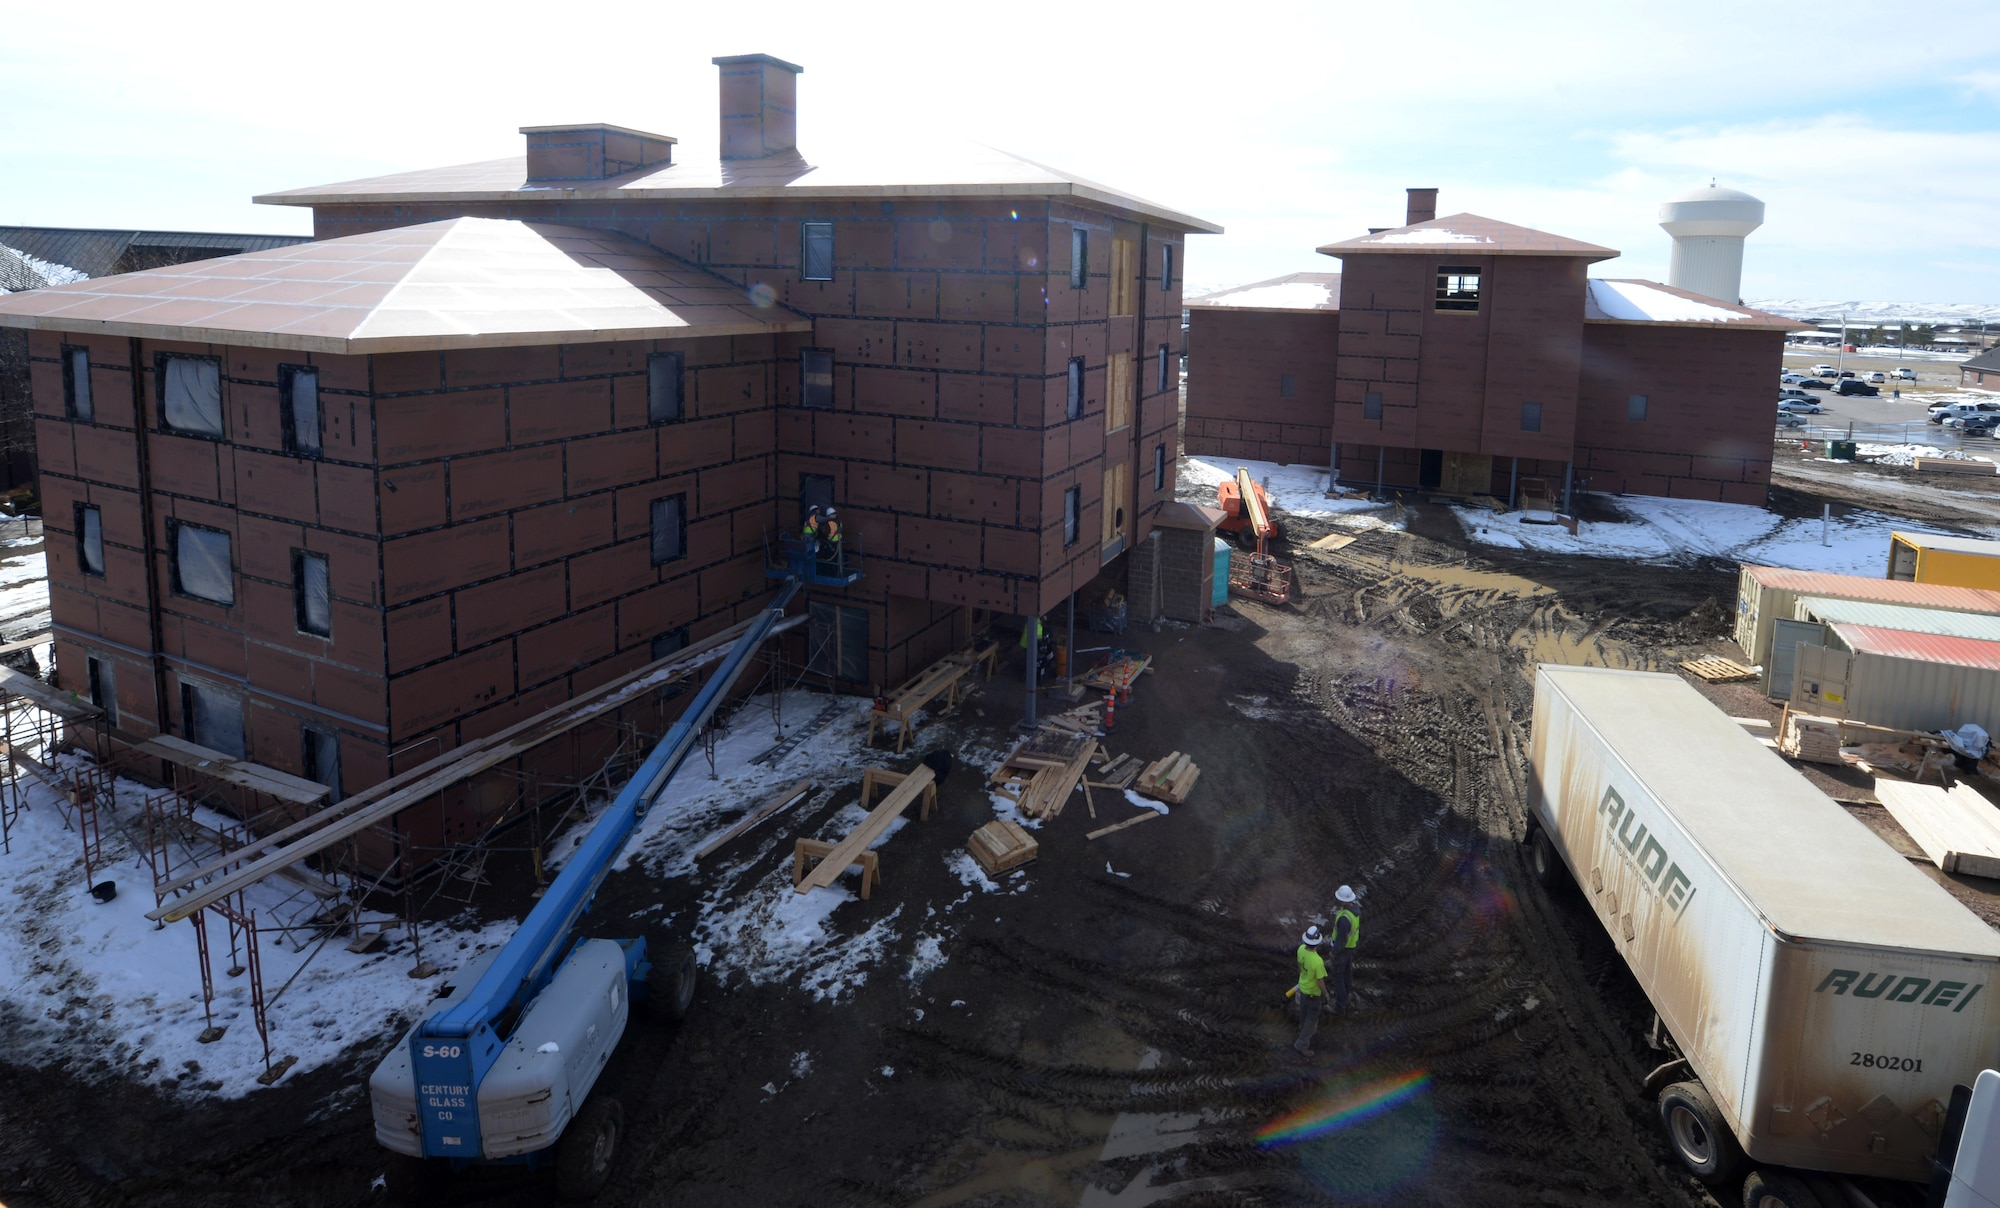 Three new dormitories are worked on March 22, 2018, at Ellsworth Air Force Base, S.D. When completed, the dorms will accommodate approximately 140 base Airmen. (U.S. Air Force photo by Airman 1st Class Thomas Karol)